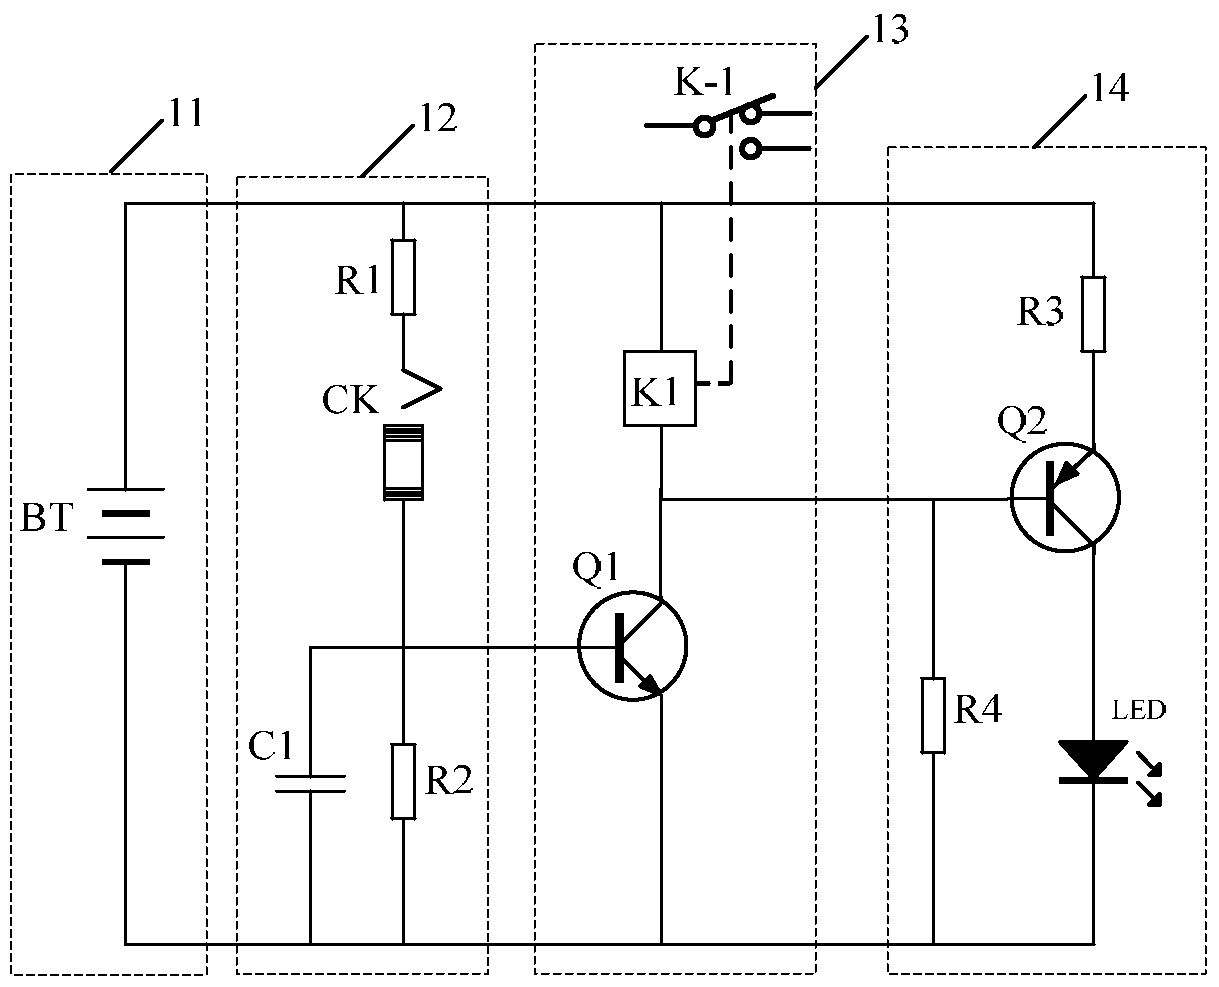 A control circuit and lighting device